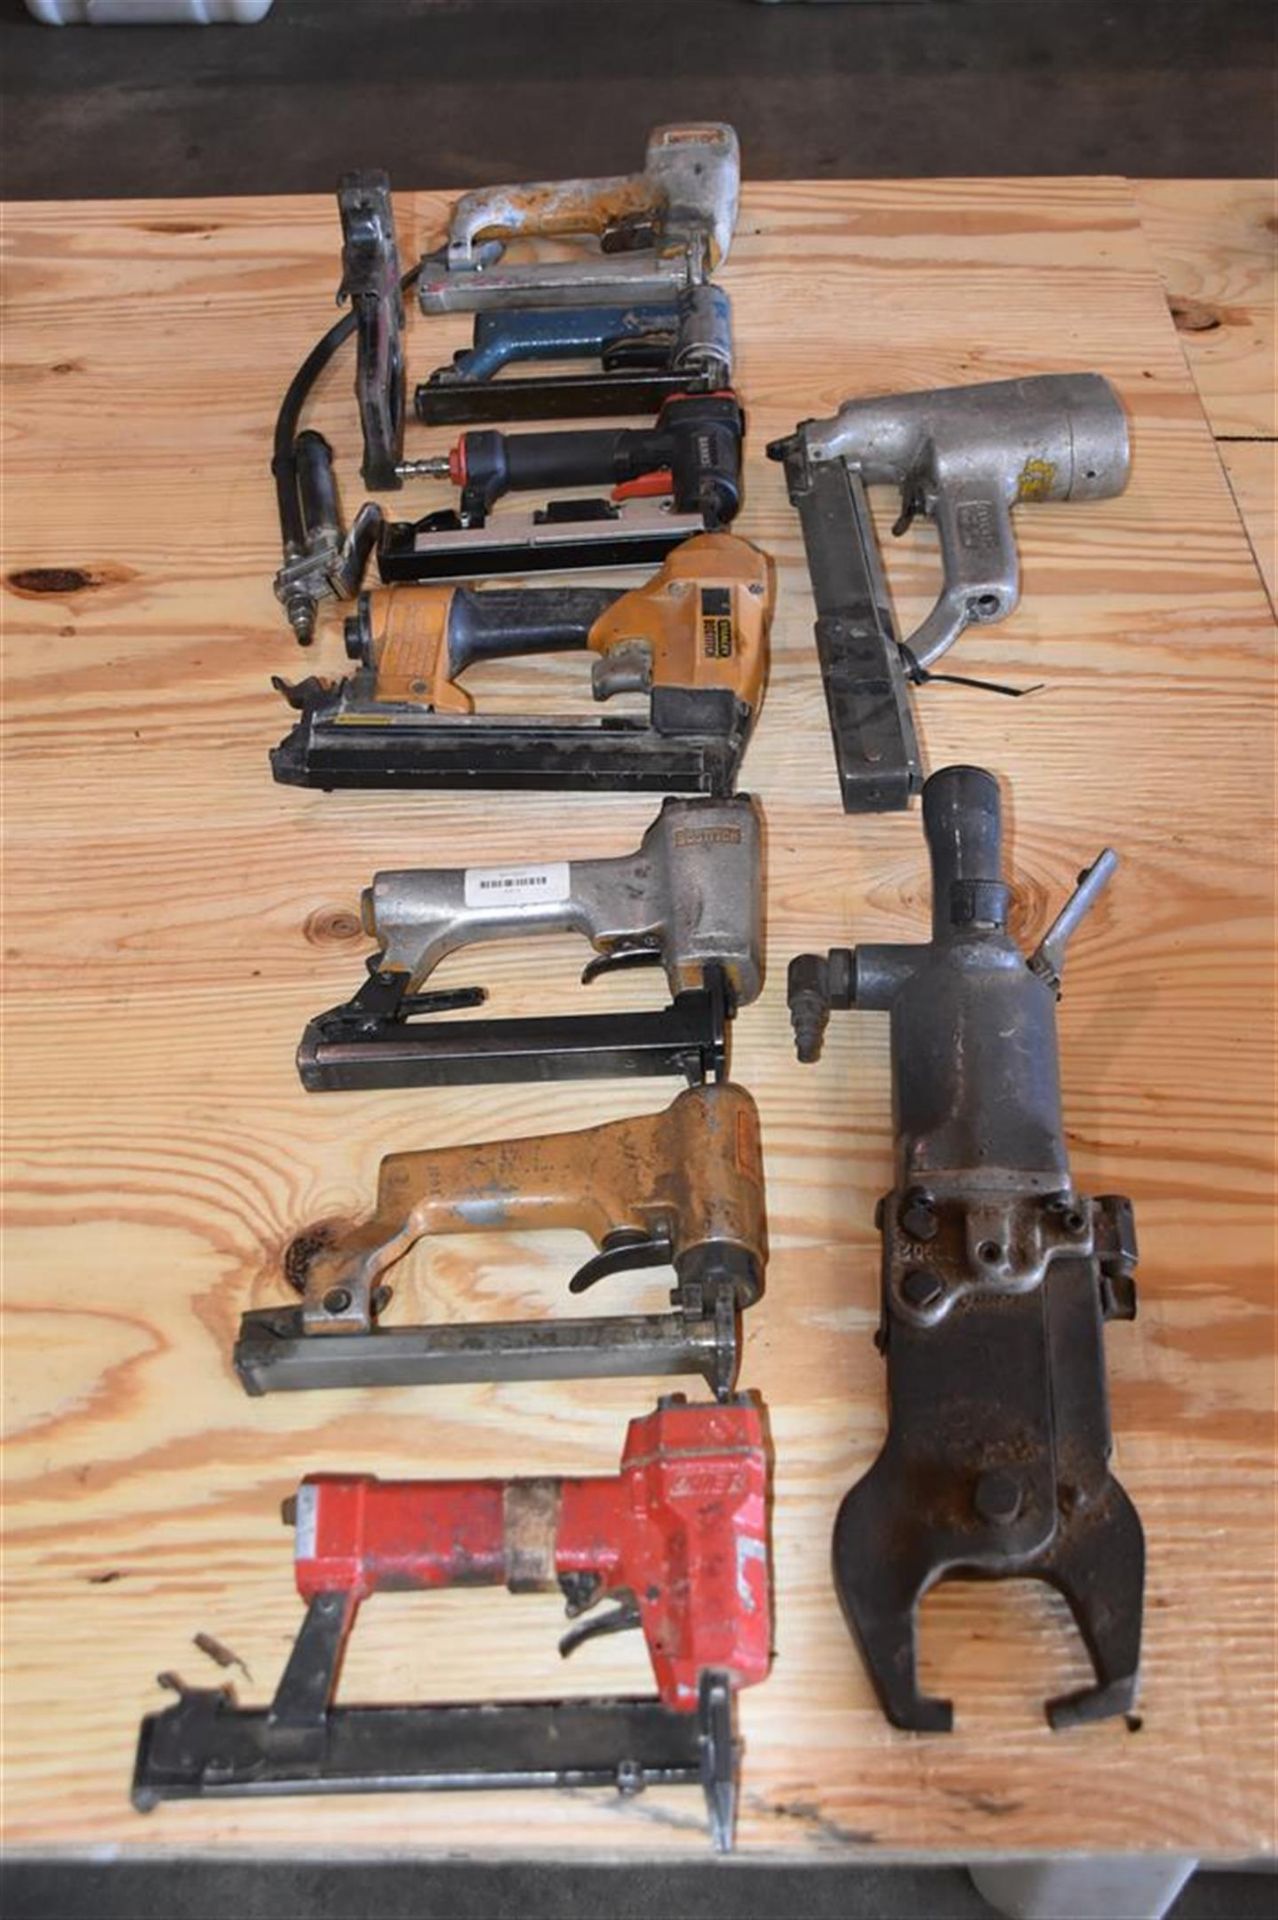 Pneumatic Nailers and Tools - Image 11 of 11